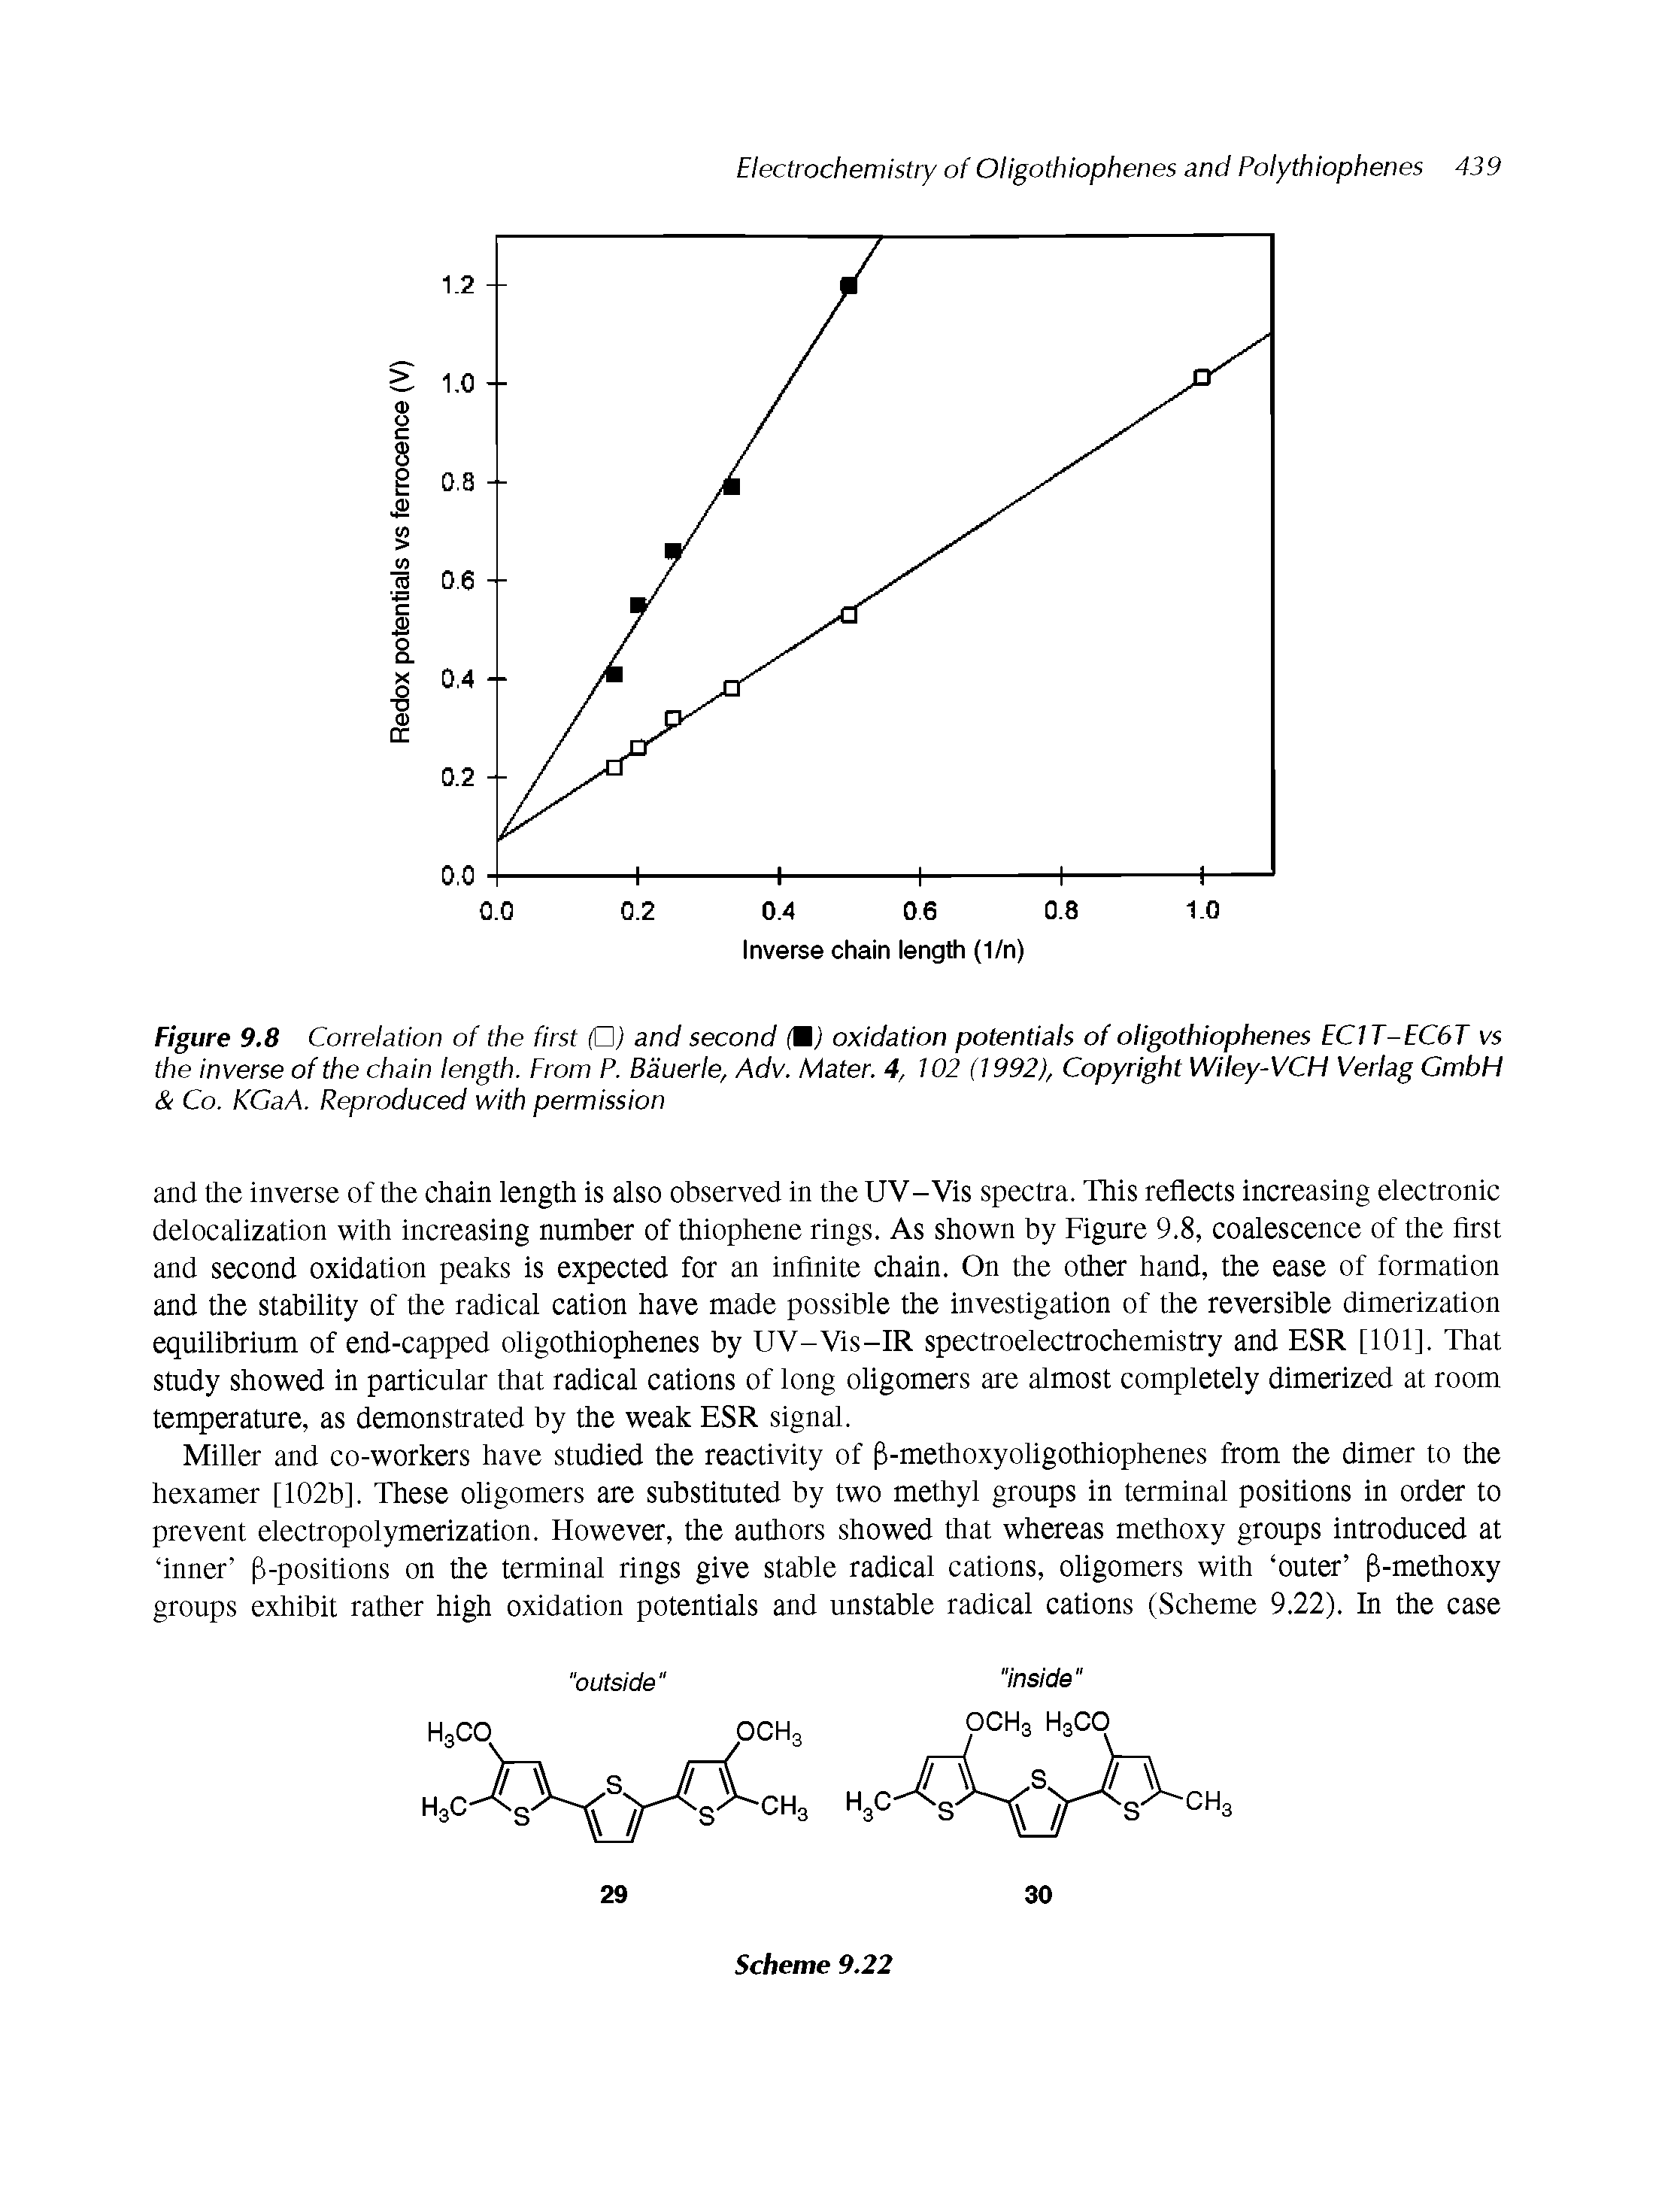 Figure 9.8 Correlation of the first Pj and second (Bj oxidation potentials of oligothiophenes EC1T-EC6T vs the inverse of the chain length. Erom P. Bauerle, Adv. Mater. 4, 102 (1992), Copyright Wiley-VCH Verlag GmbH Co. KGaA. Reproduced with permission...